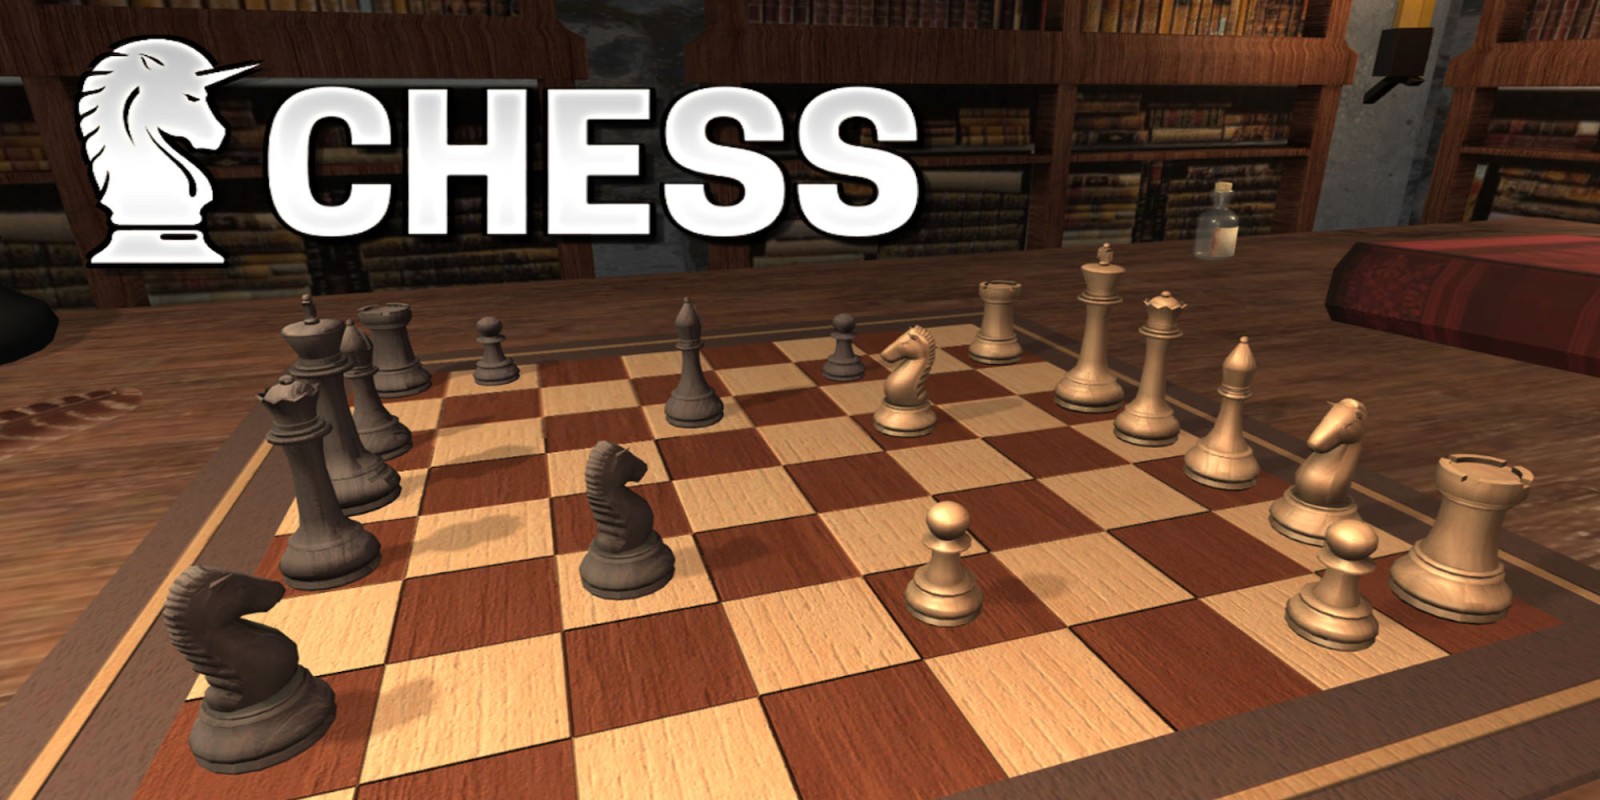 learn play chess online